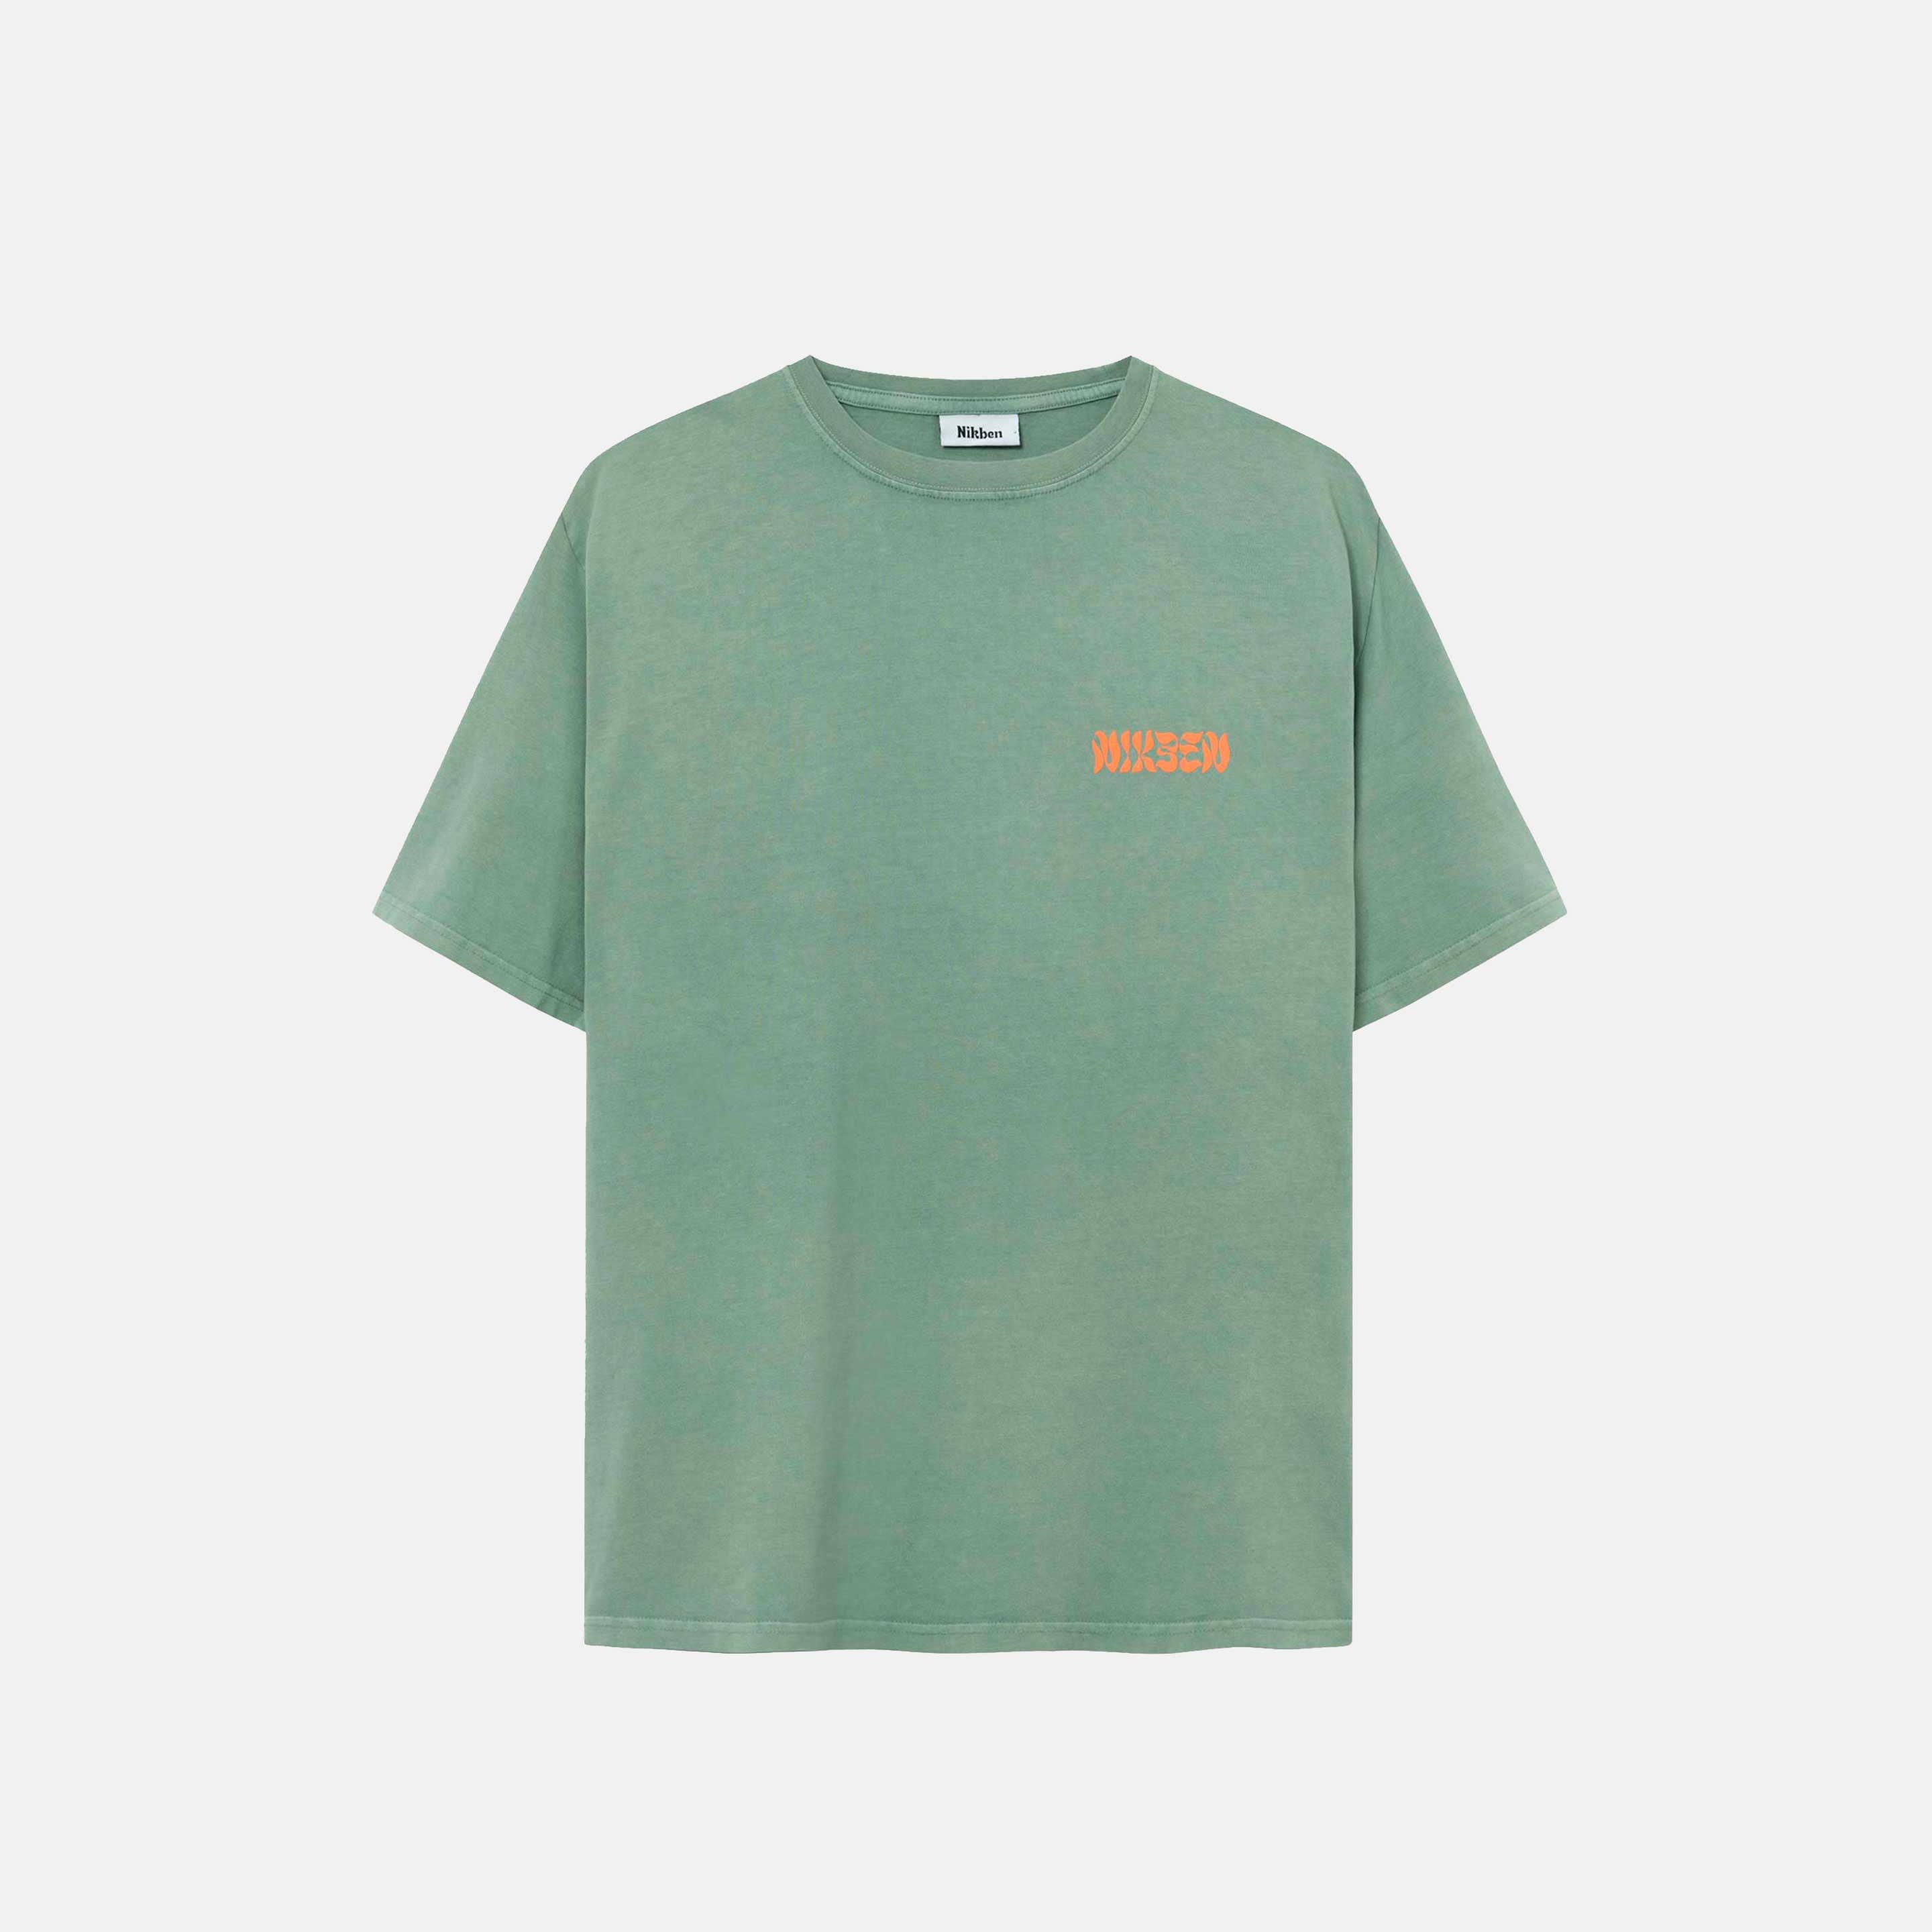 Green t-shirt with orange puffy "nikben" logo on the chest.